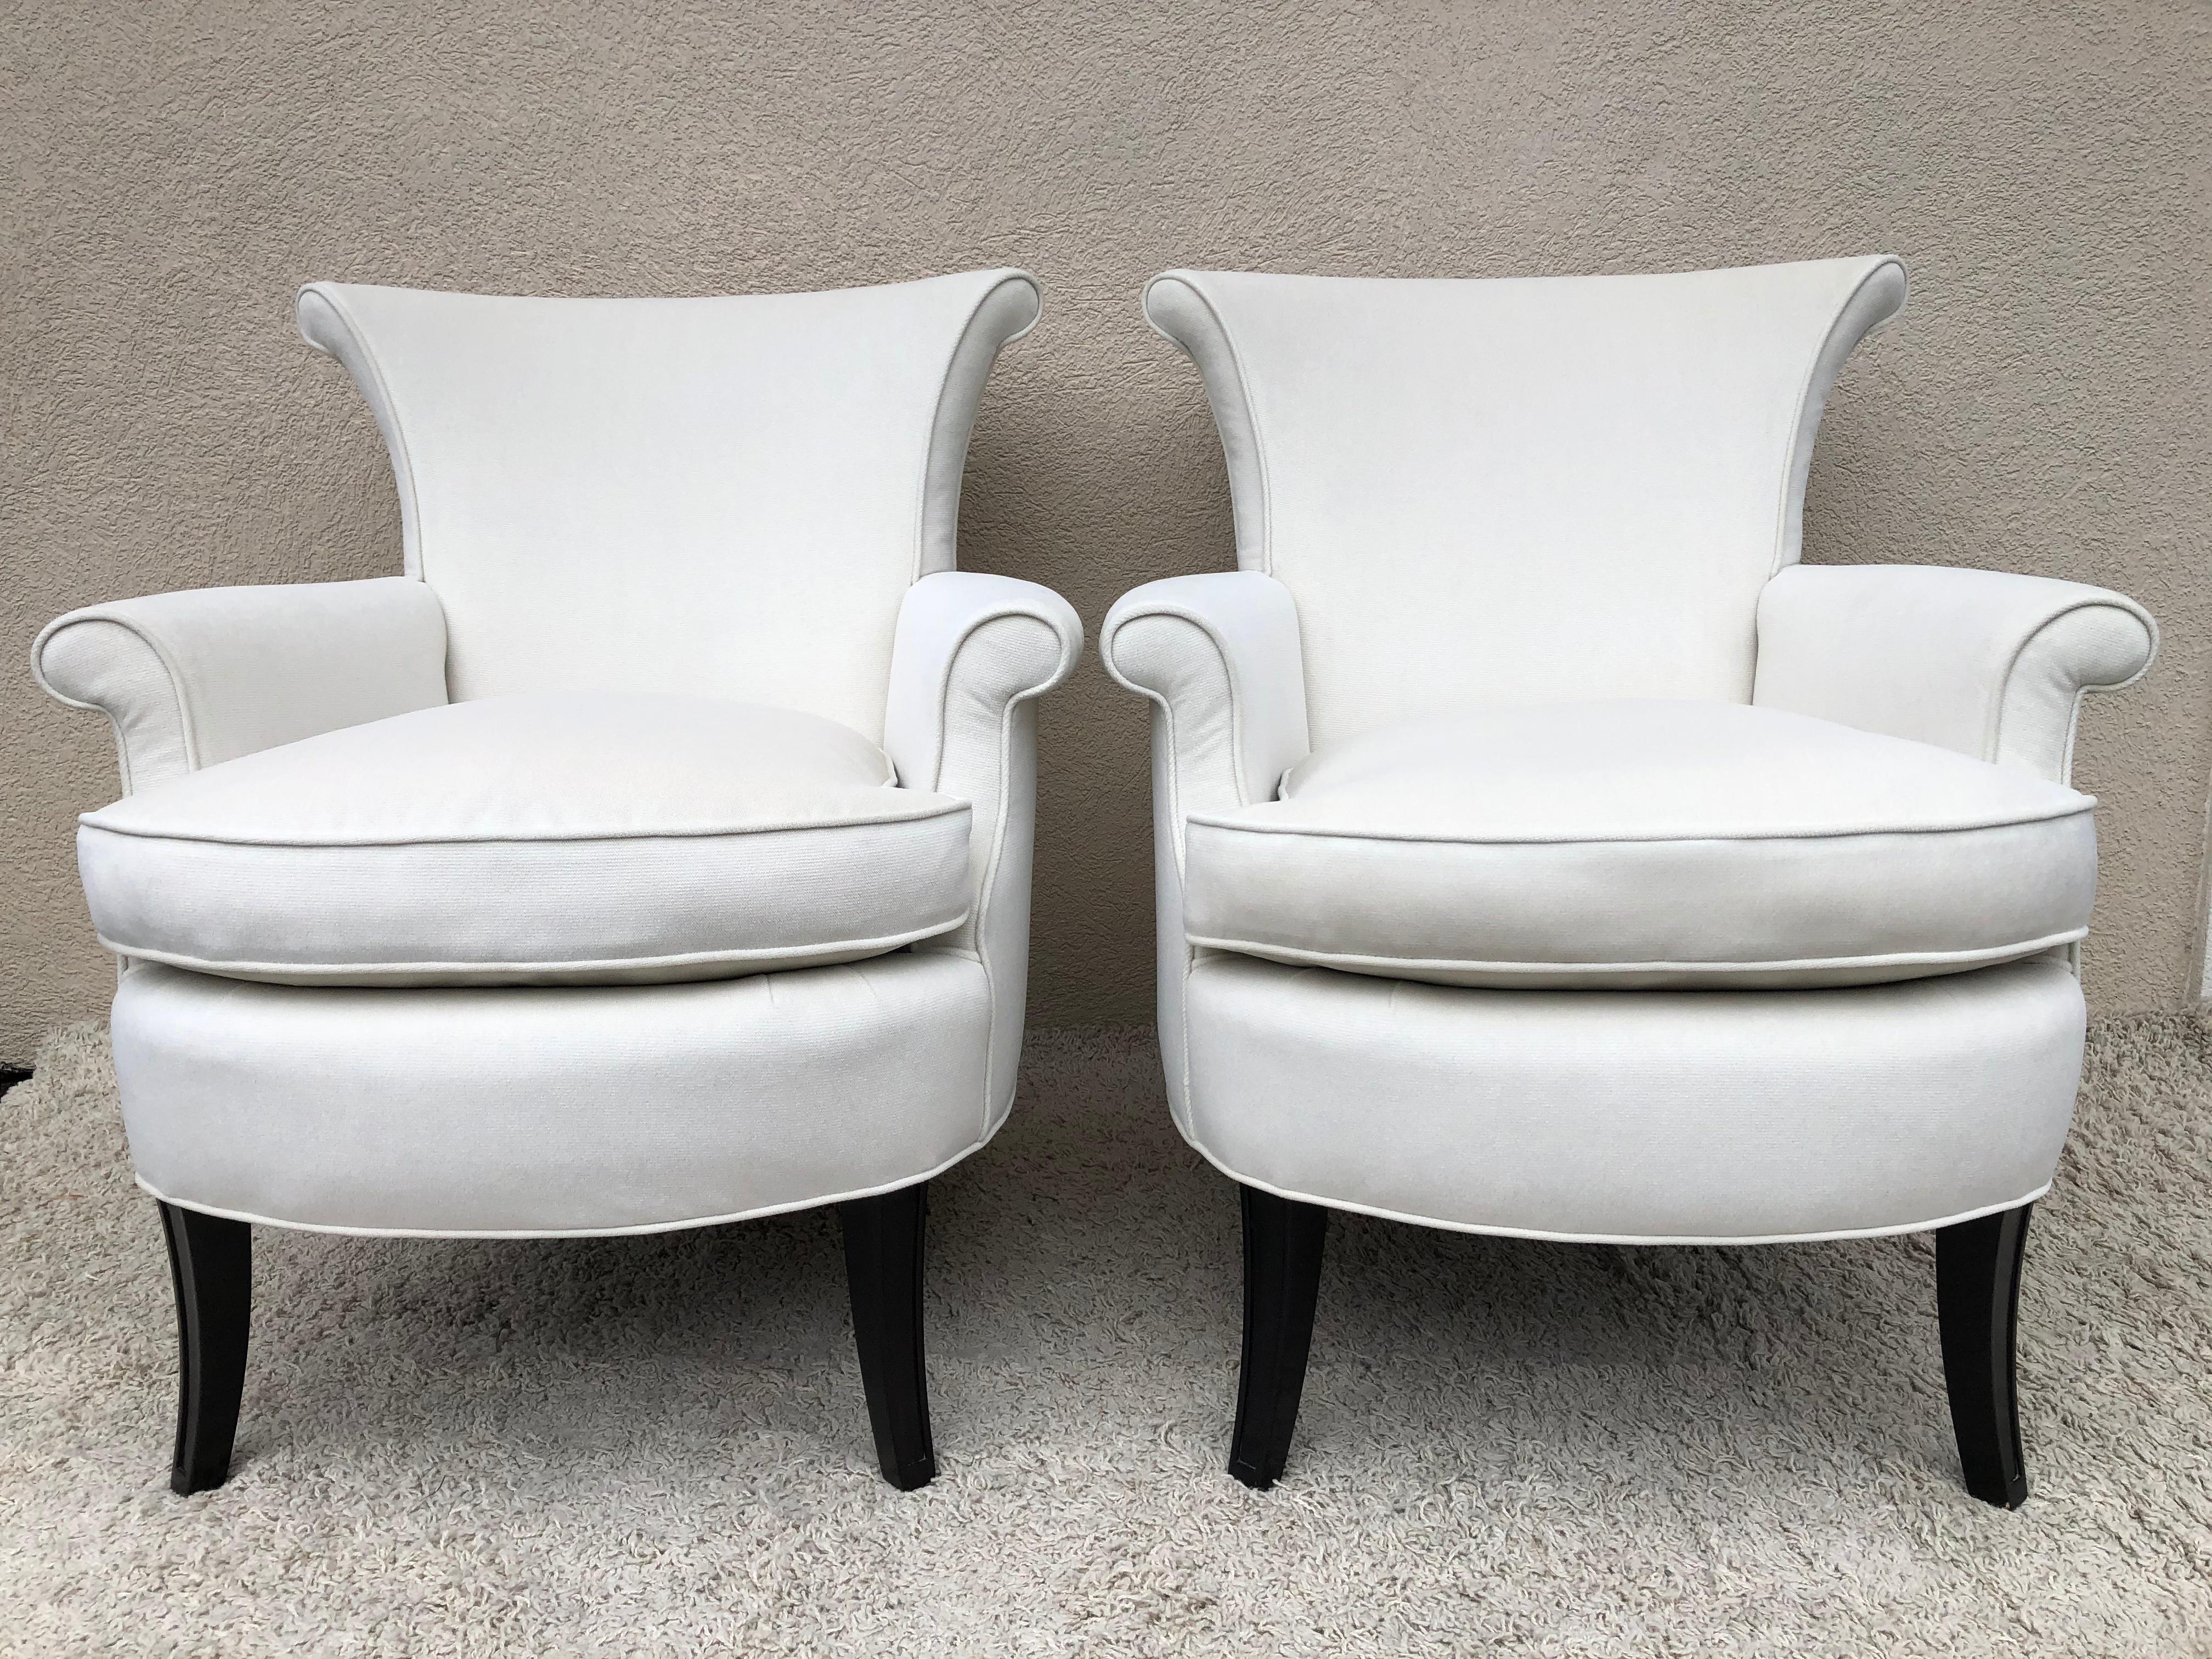 Pair of Tommi Parzinger, for Charek modern petite club/slipper arm chairs , in a off white chenille velvet .Original Down cushions .Nice scale and detail the shape.